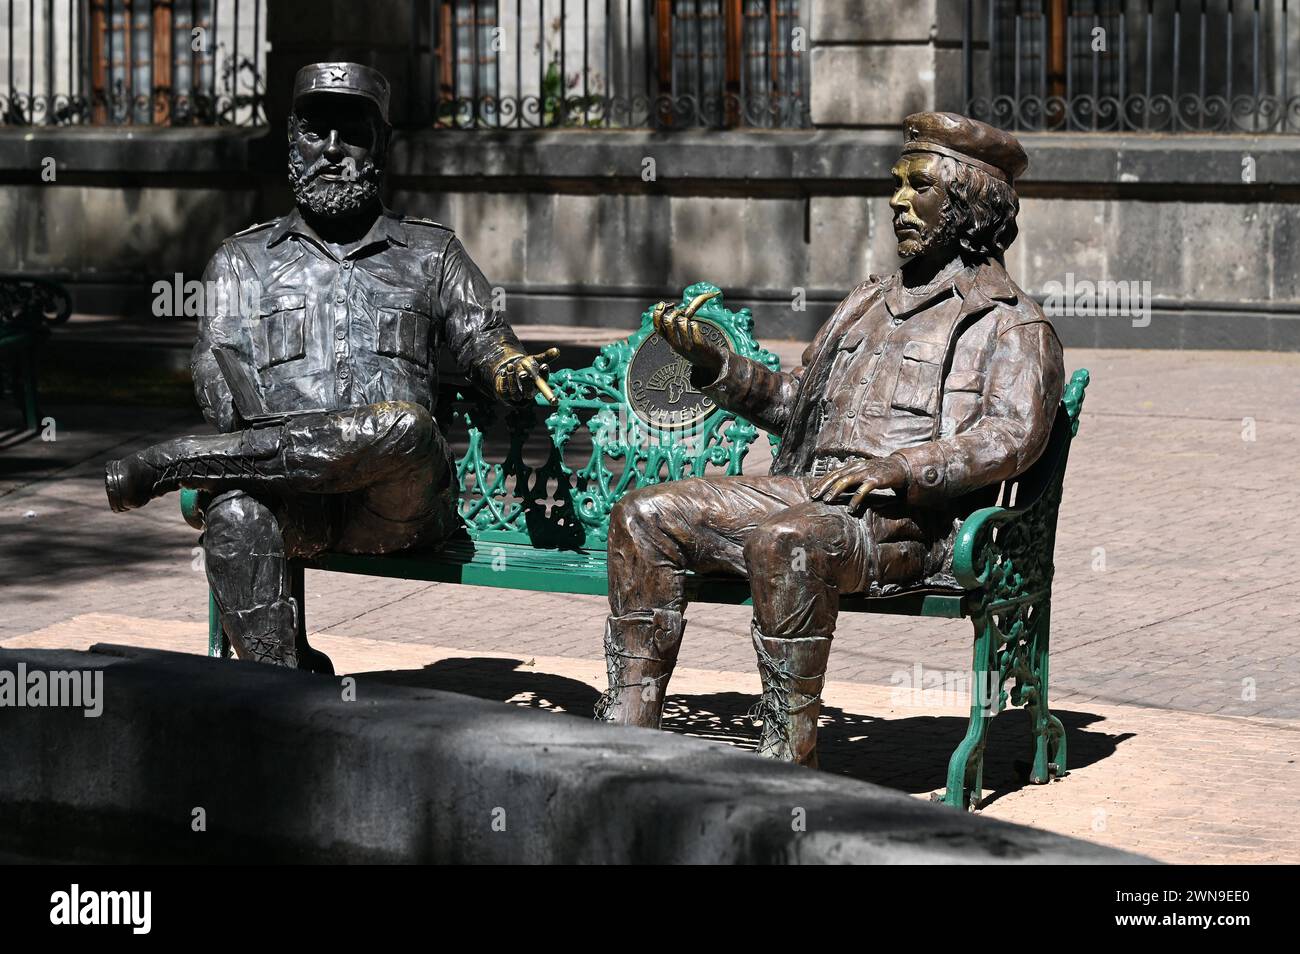 Monumento Encuentro, Meeting Monument, two bronze statues of Fidel Castro and Che Guevara, Tabacalera, Cuauhtemoc, Mexico City Stock Photo